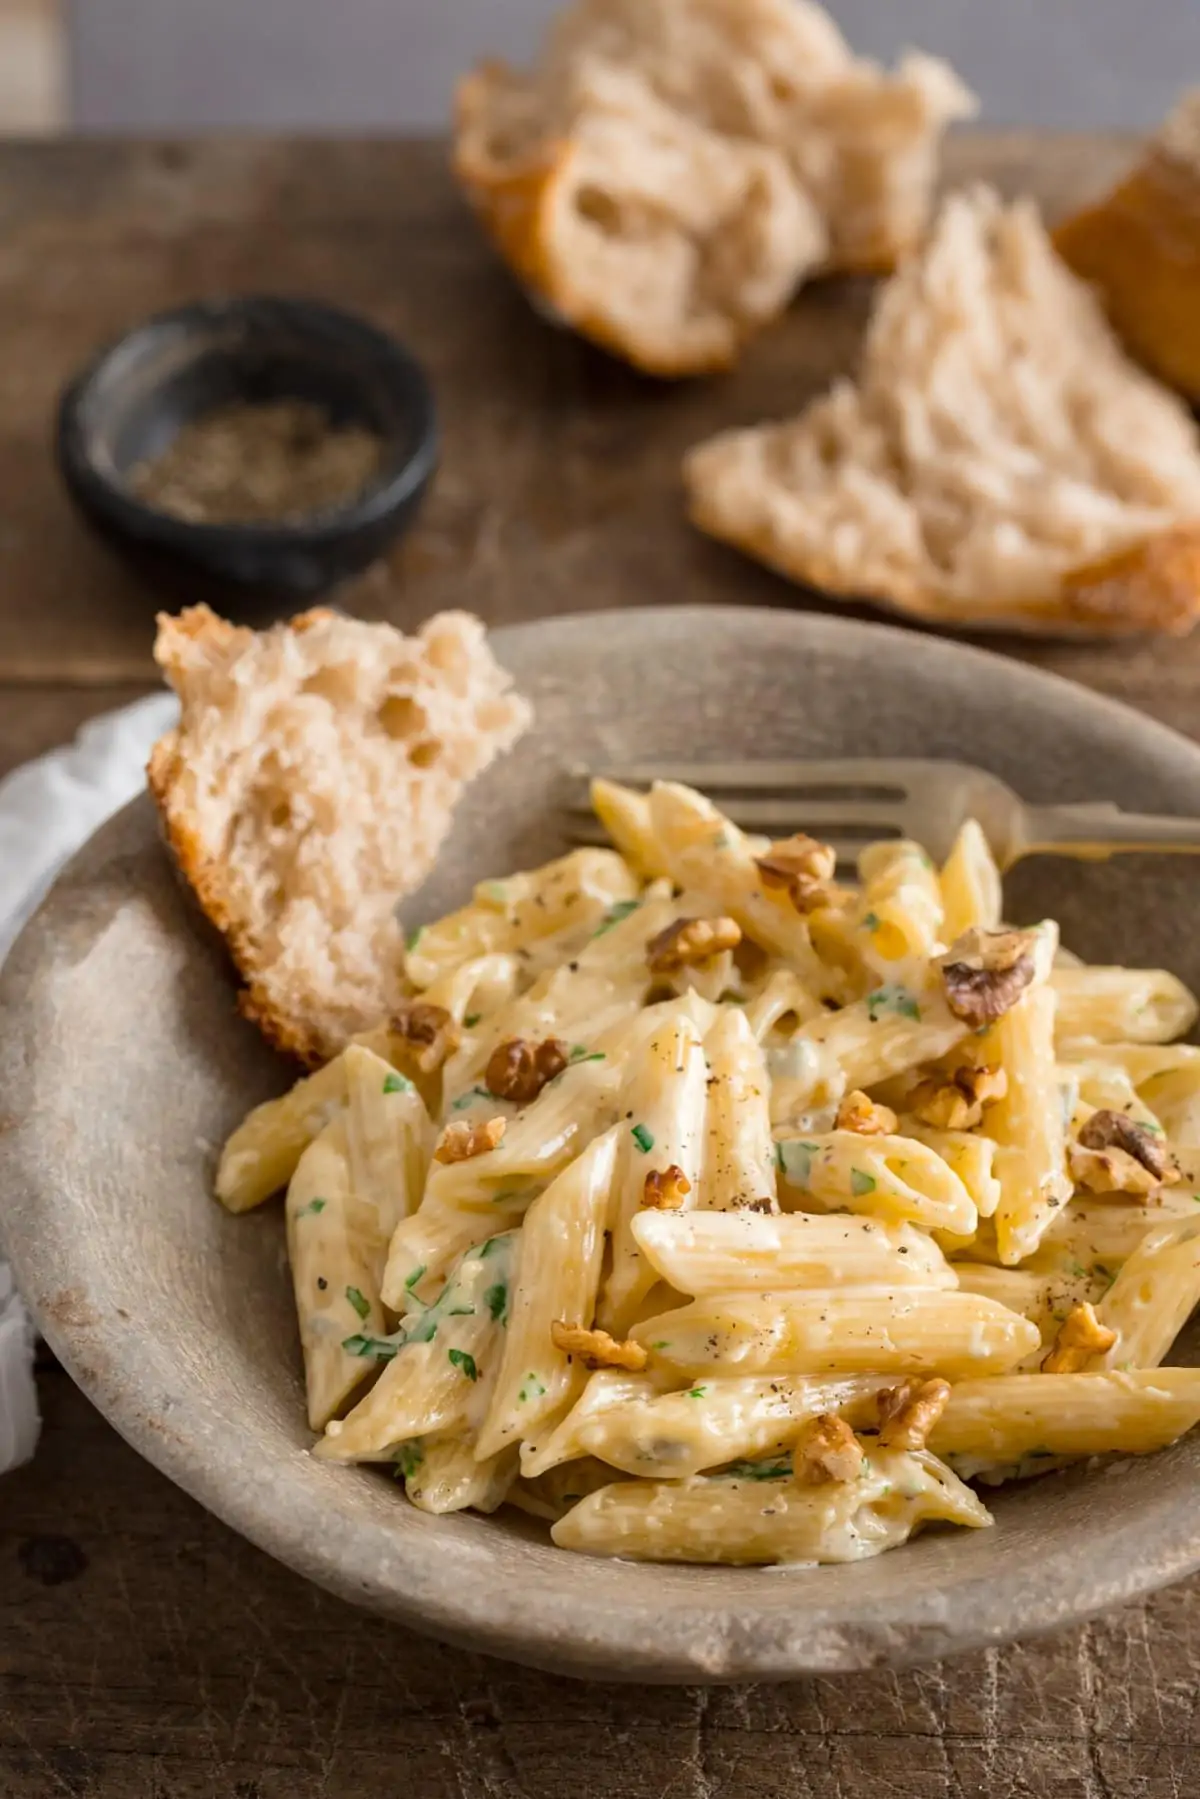 Make Flavorful Pasta With Gorgonzola Cheese Sauce In Under 15 Minutes! 